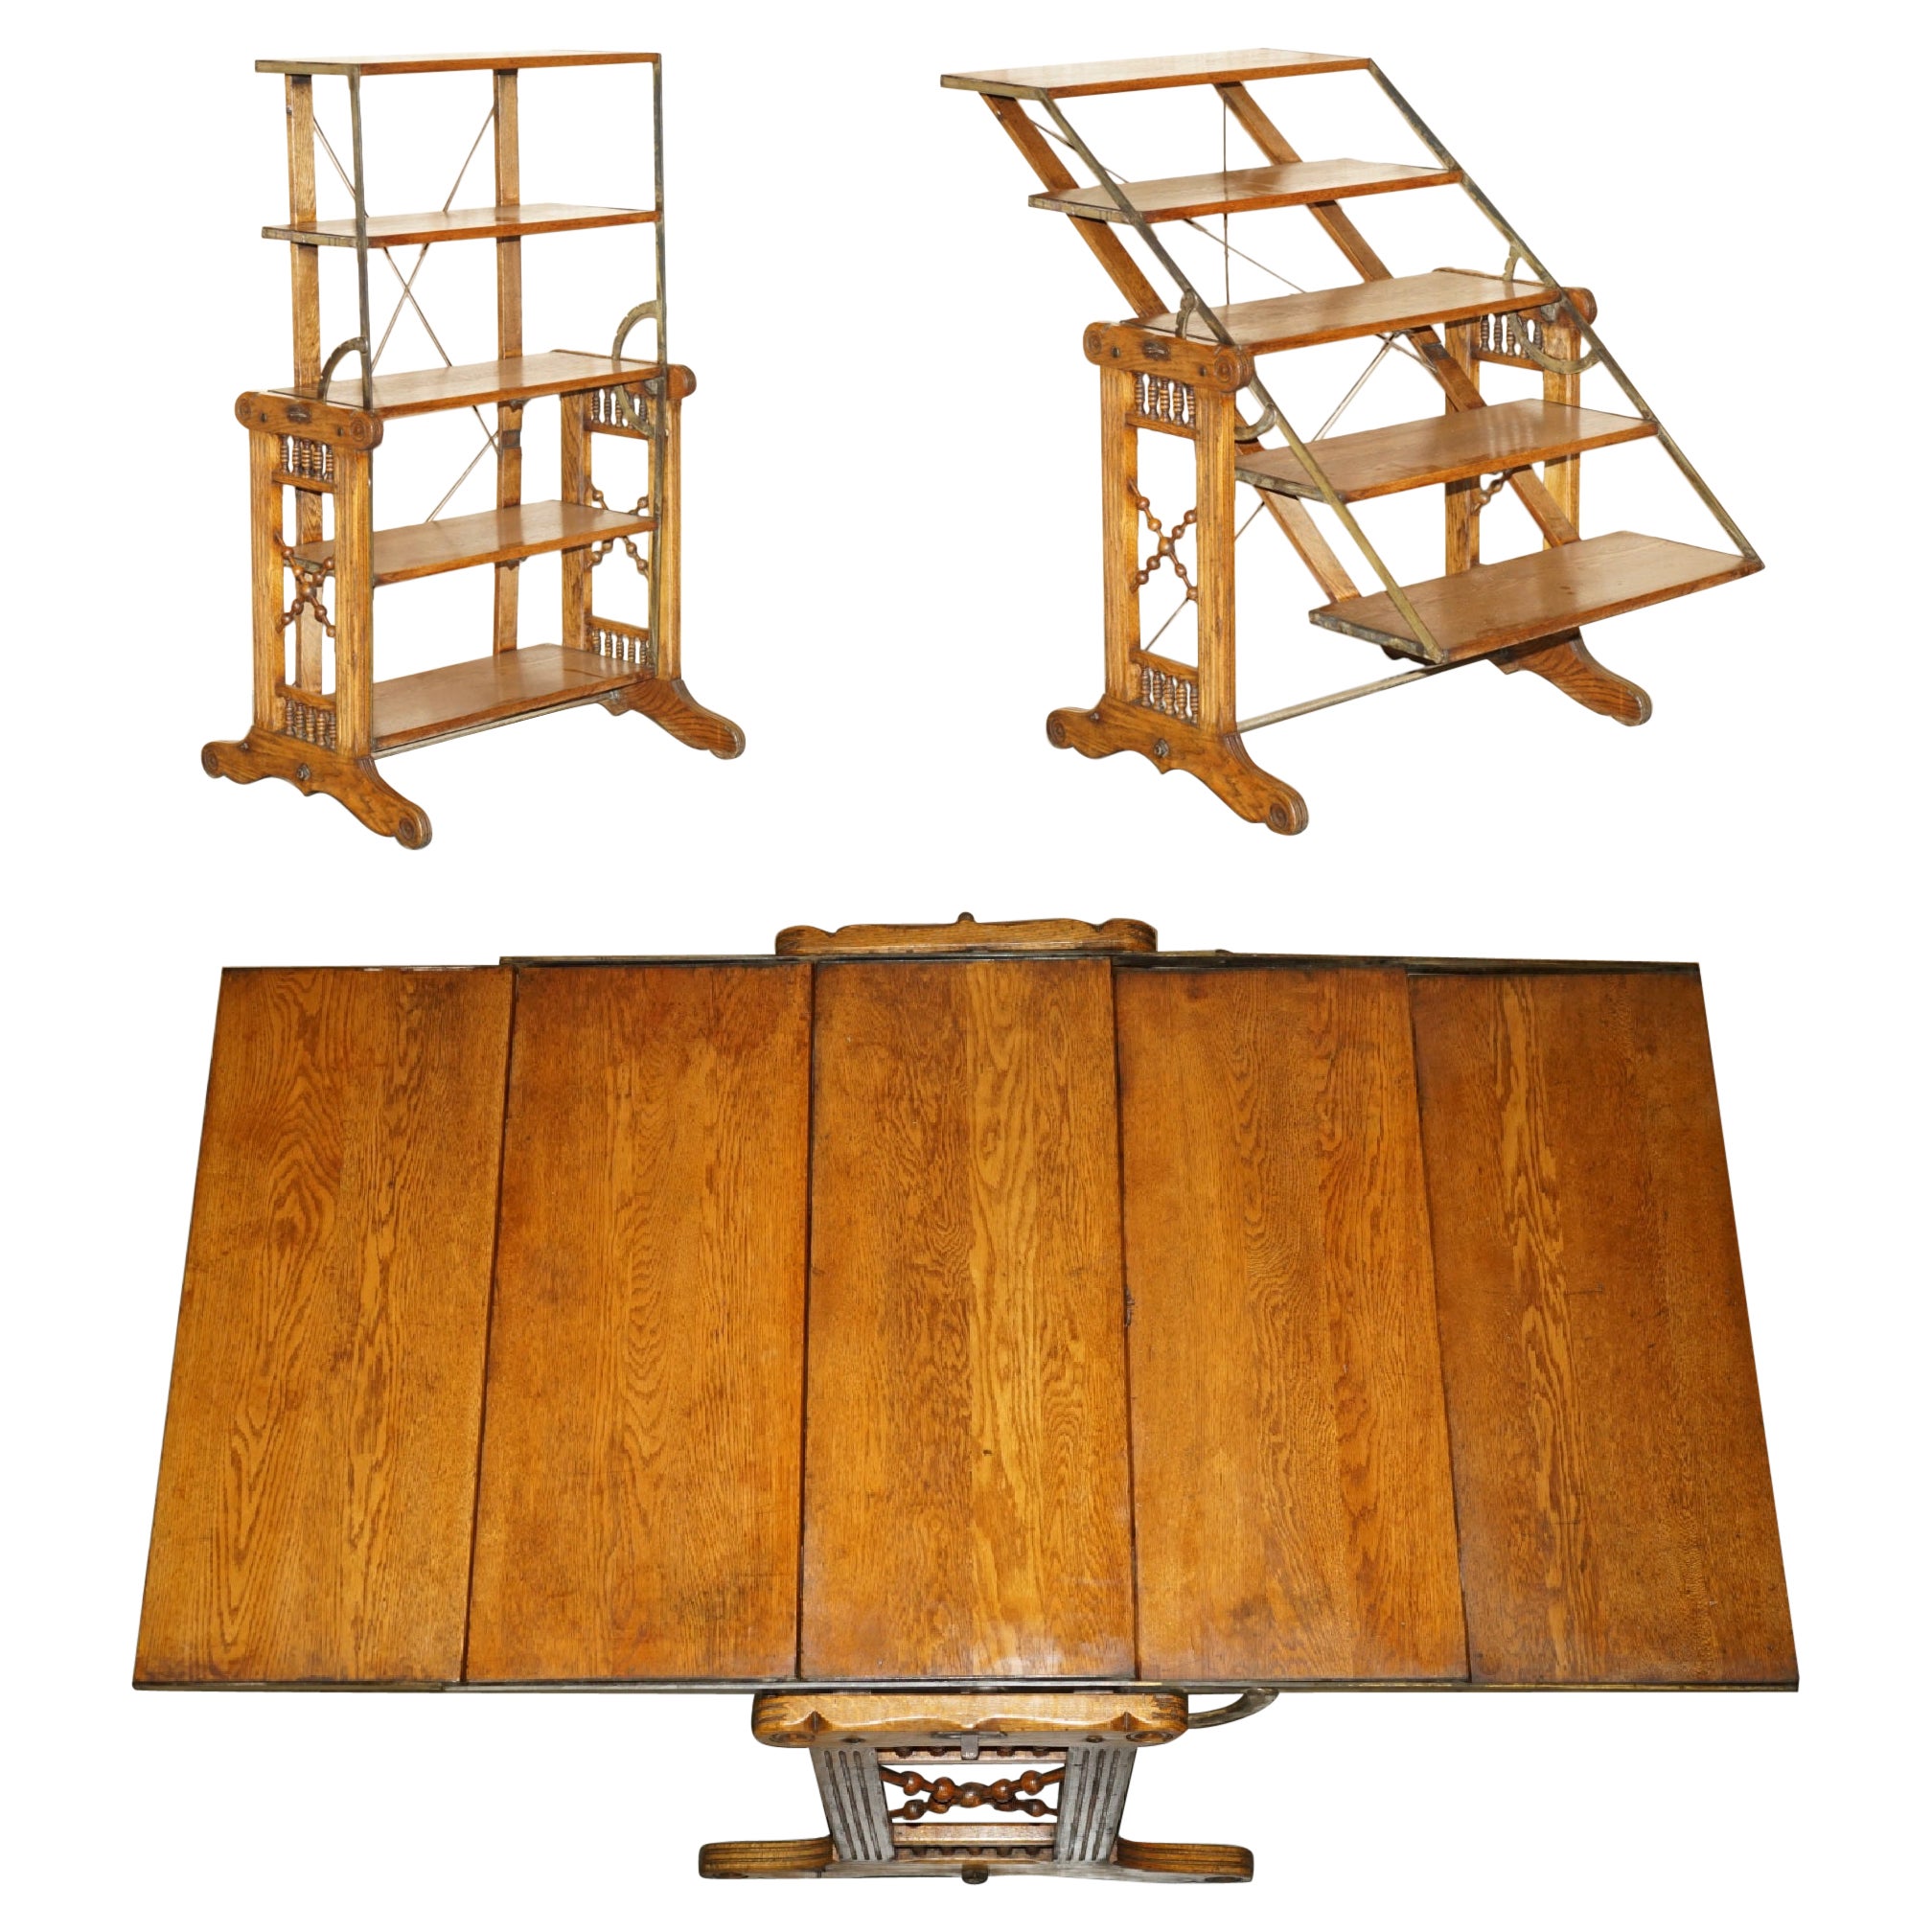 FULLY RESTORED CiRCA 1910 BOECKH BROTHERS METAMORPHIC BAKERS TABLE BOOKCASE For Sale